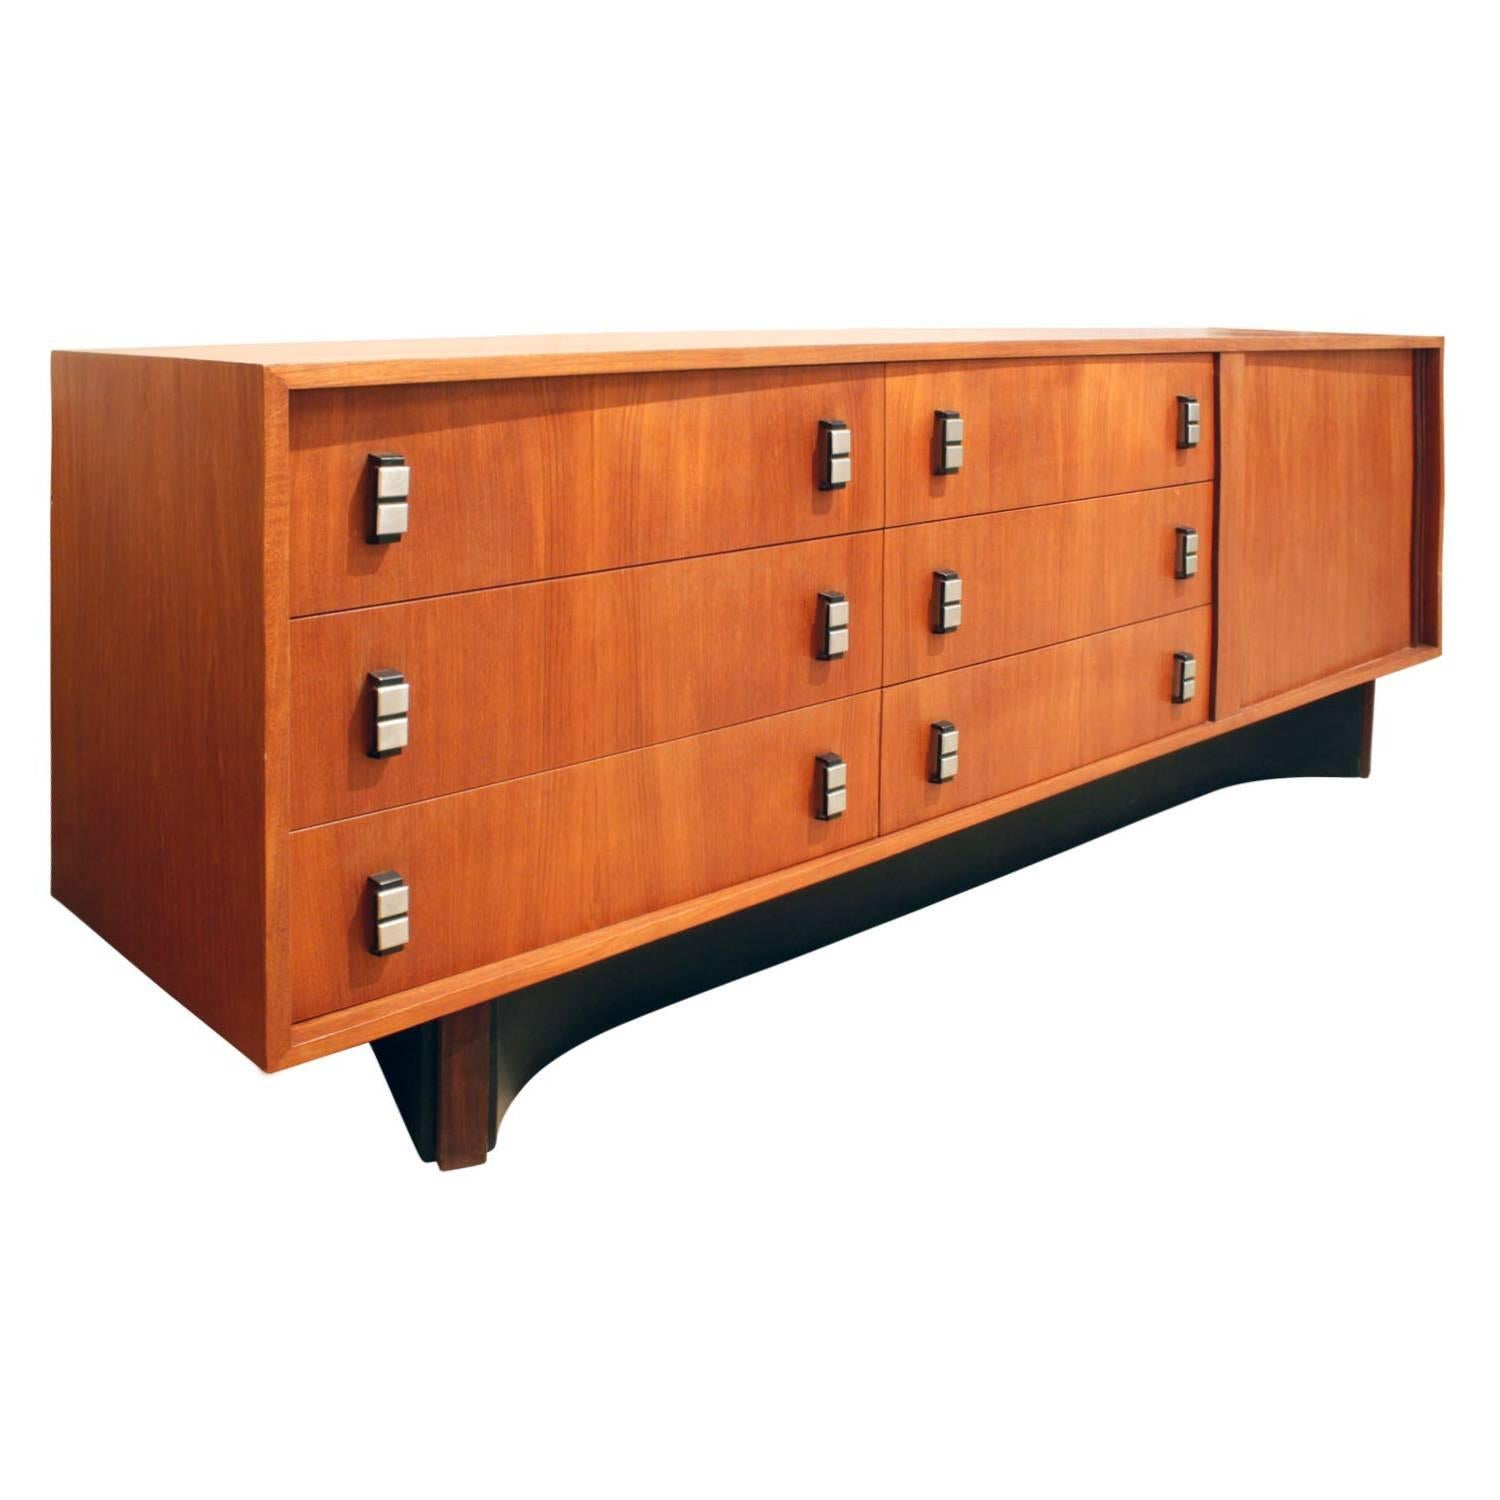 Credenza in teak with tambour door, steel pulls and leather wrapped sculptural base by RS Associates Ltd, Canada, 1960s.